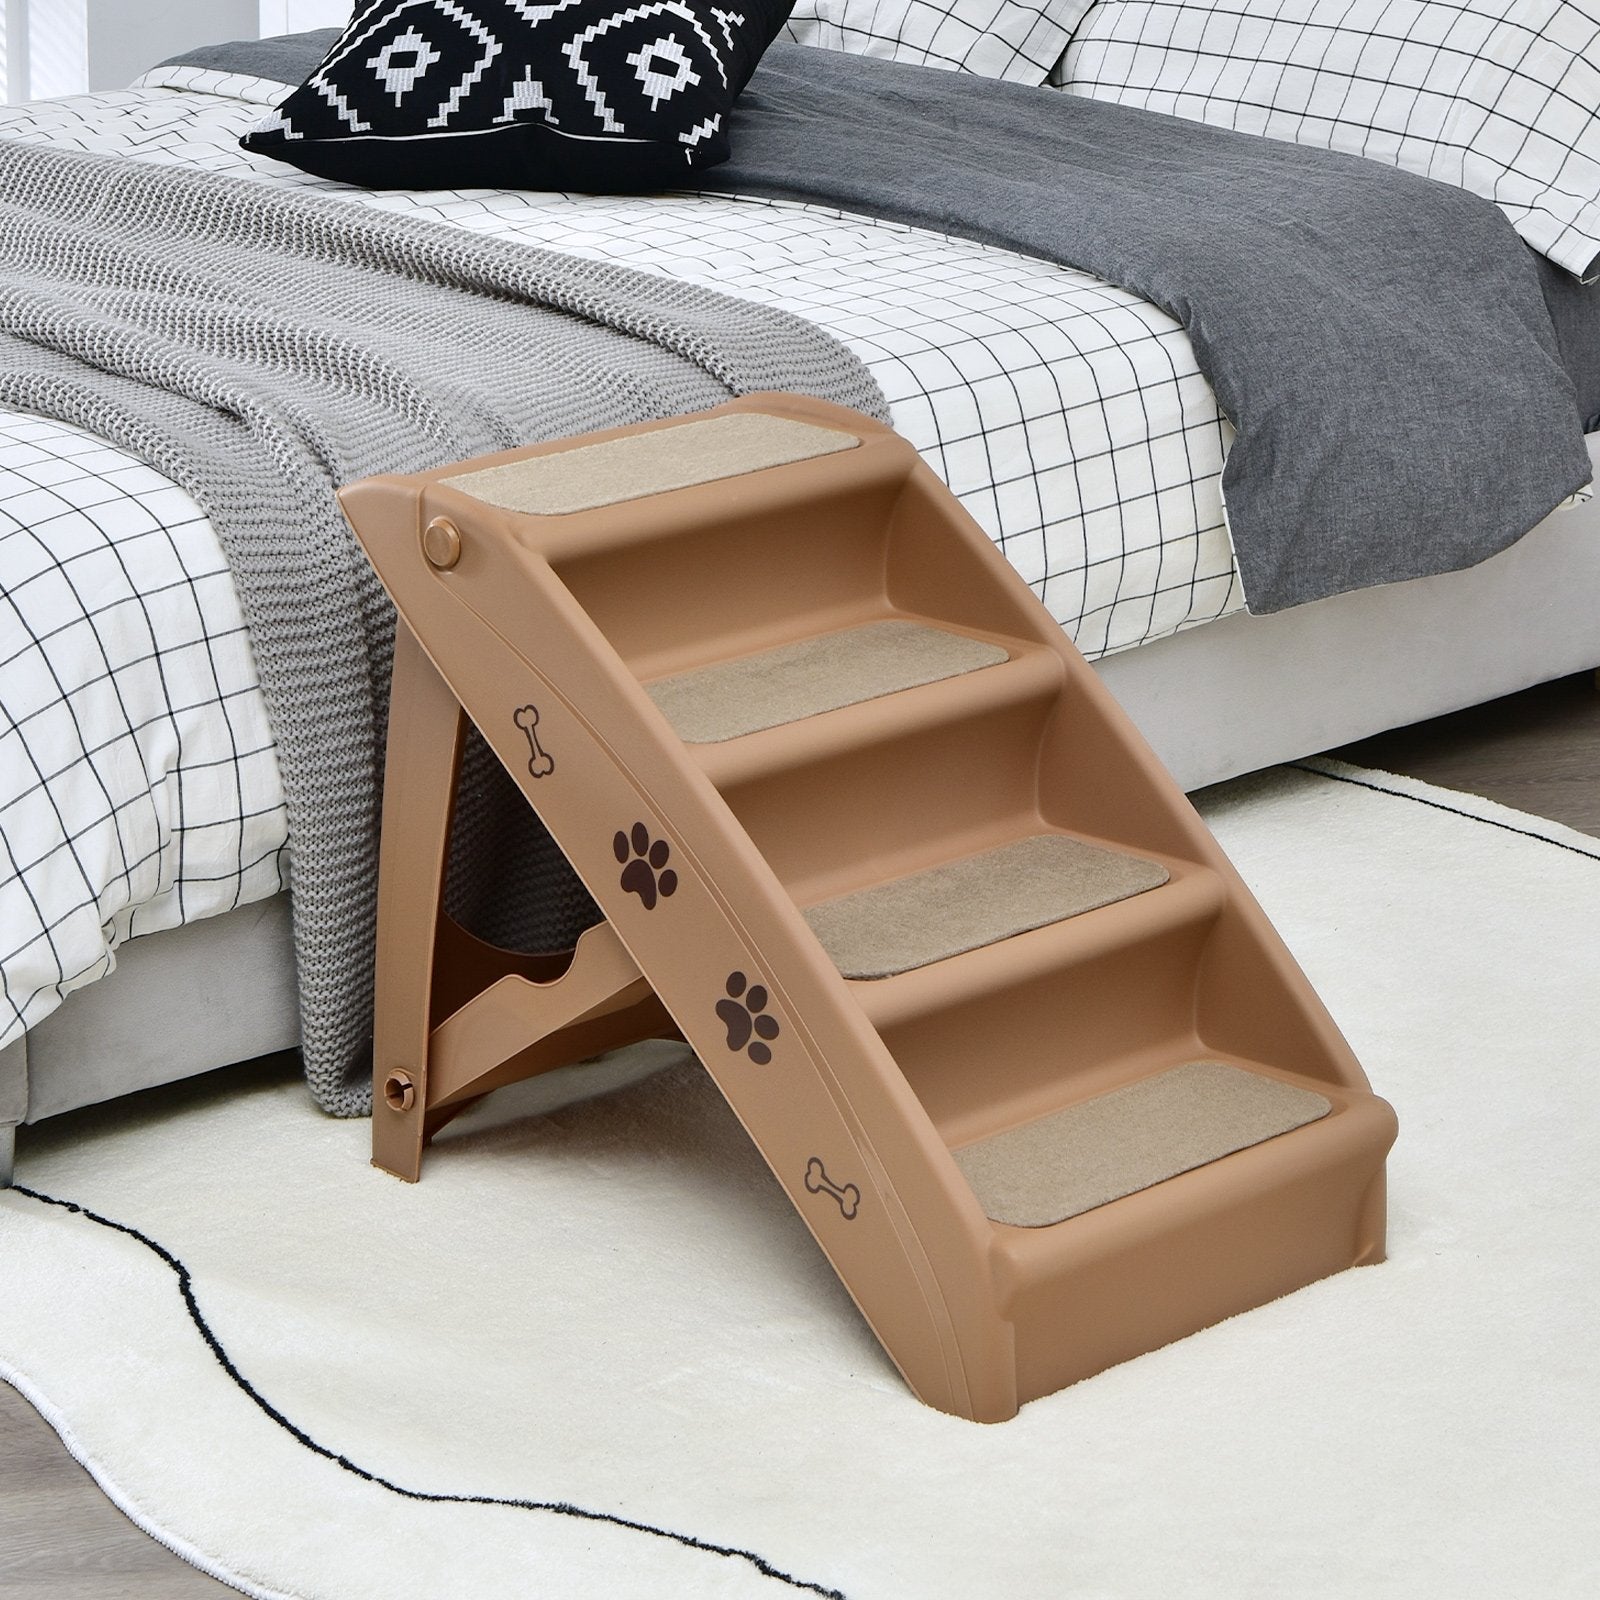 Collapsible Plastic Pet Stairs 4 Step Ladder for Small Dog and Cats, Coffee - Gallery Canada